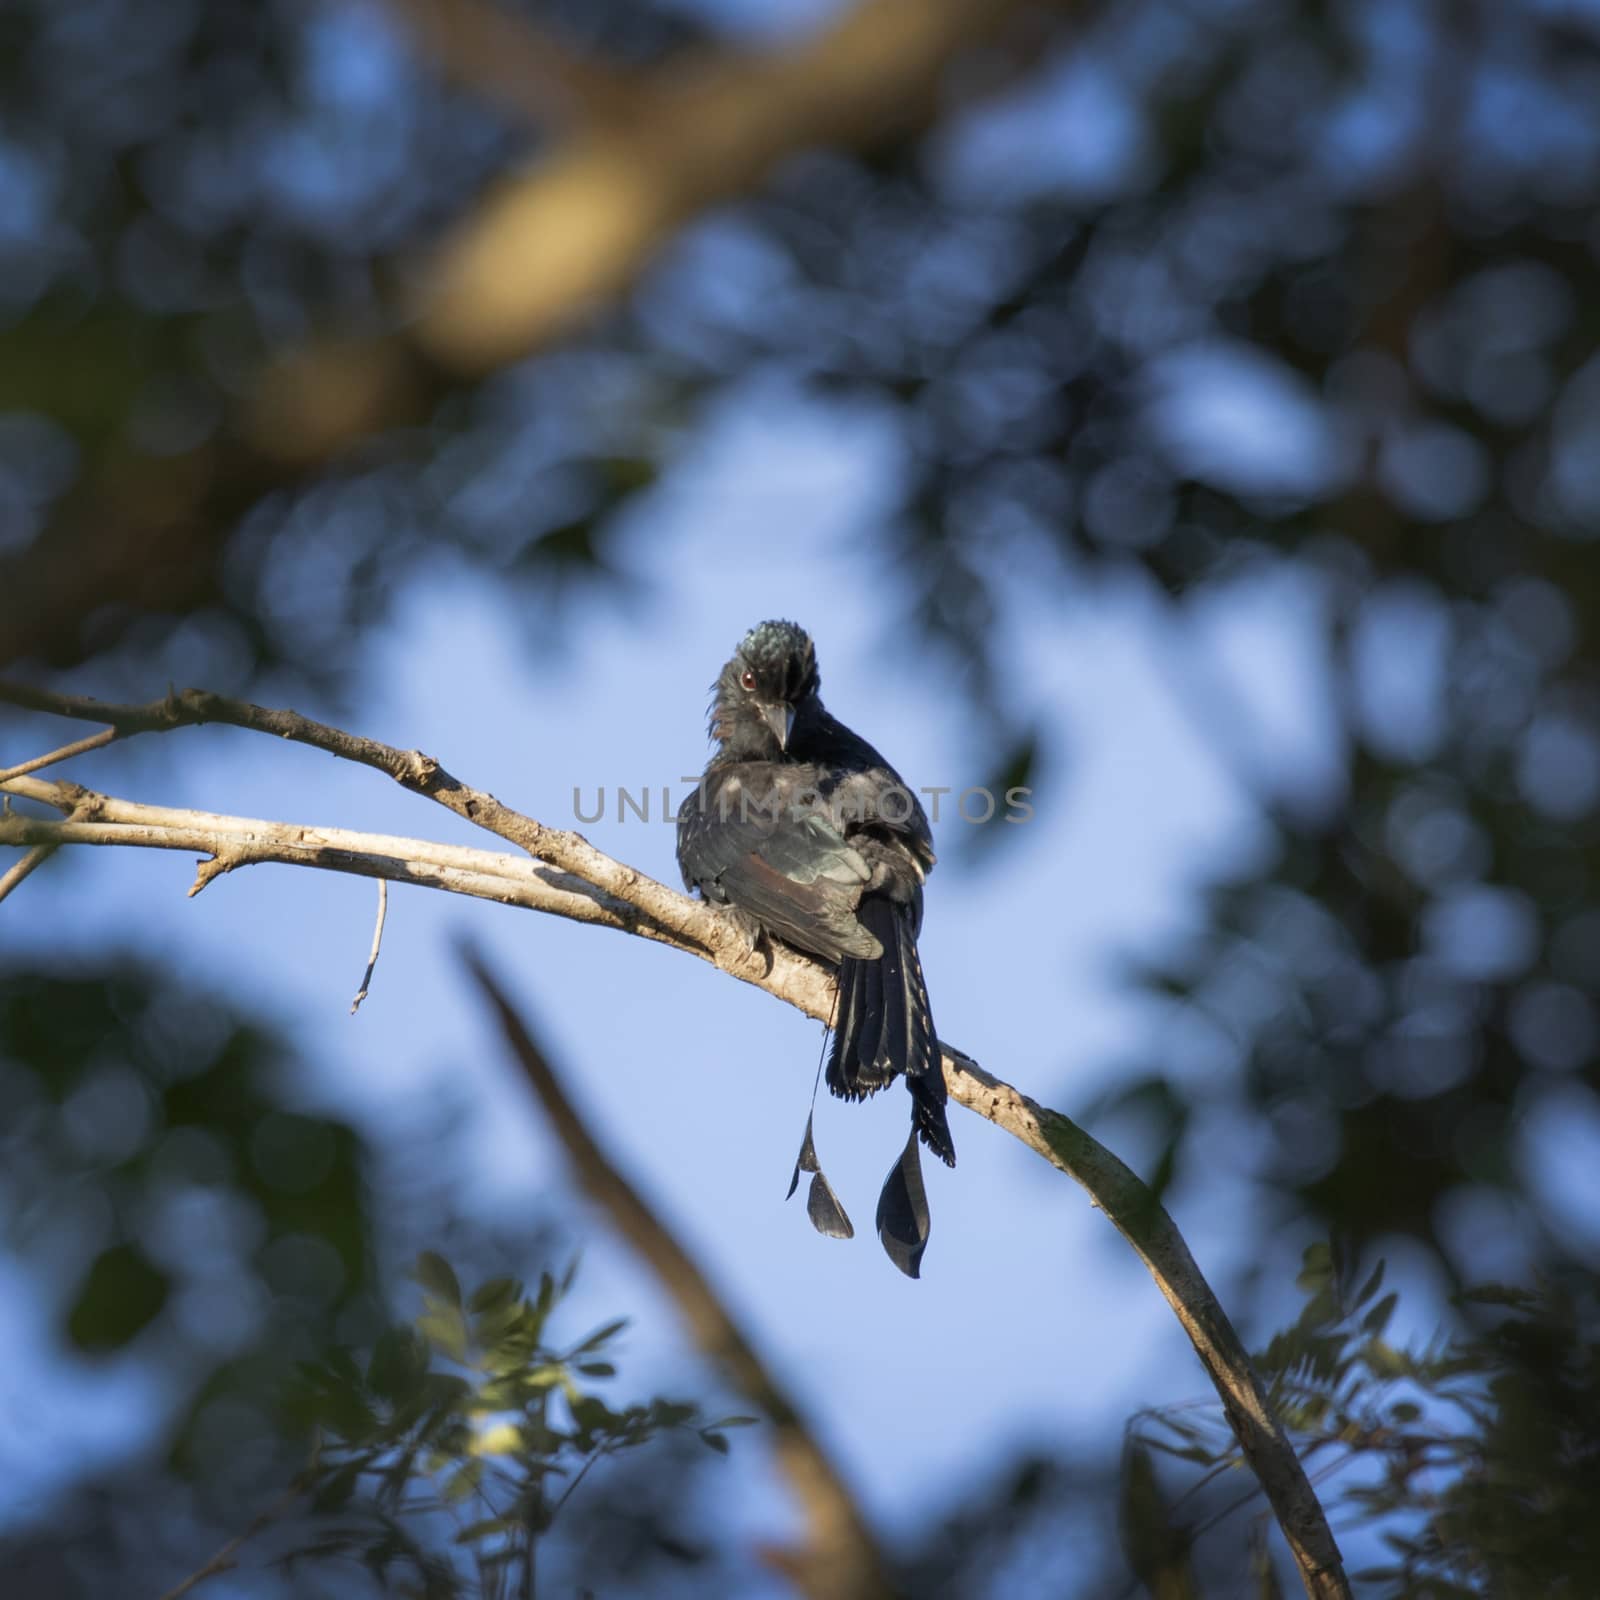 Image of Greater Racket-tailed Drongo perched on tree branch. in by yod67